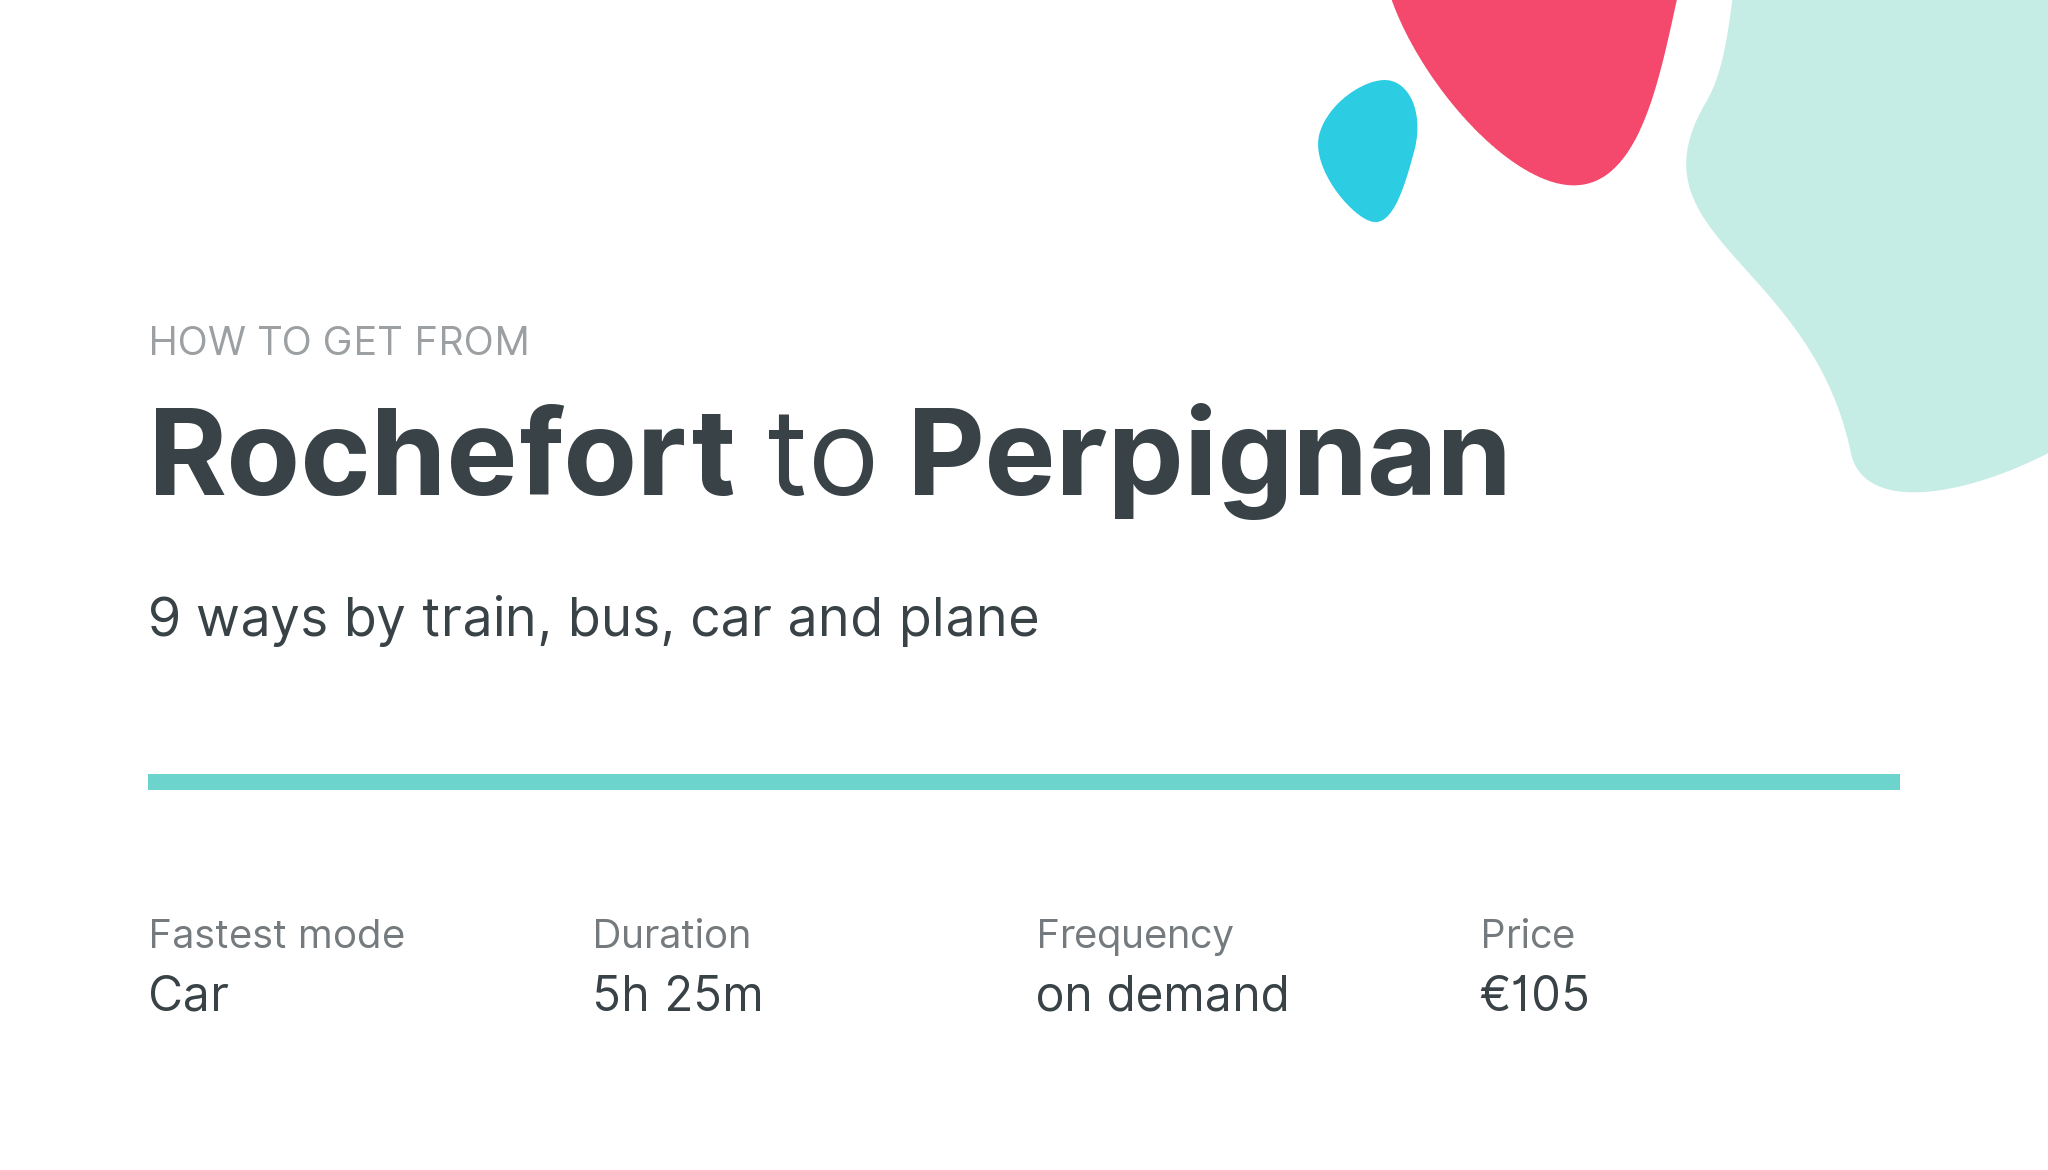 How do I get from Rochefort to Perpignan